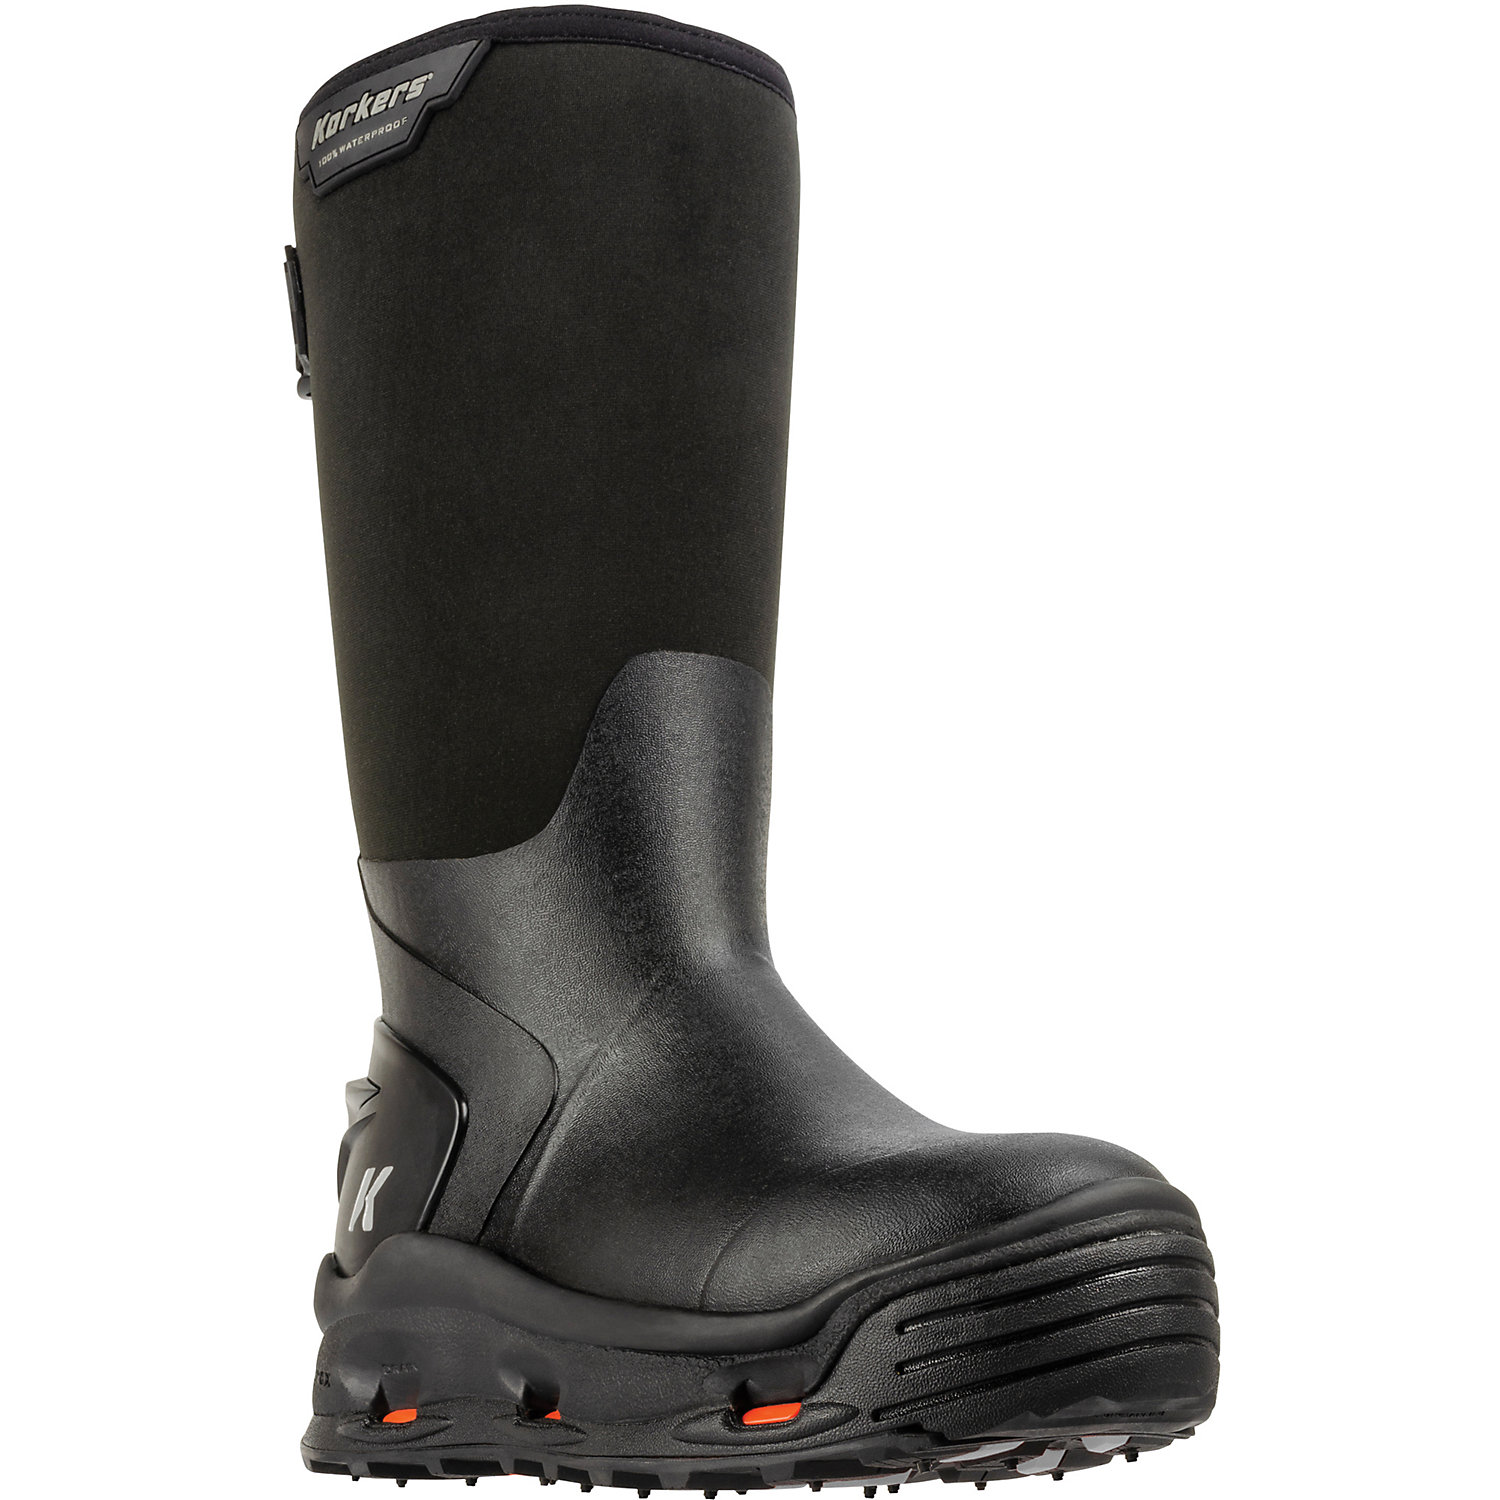 Korkers Mens Neo Storm Boot with All Terrain Sole